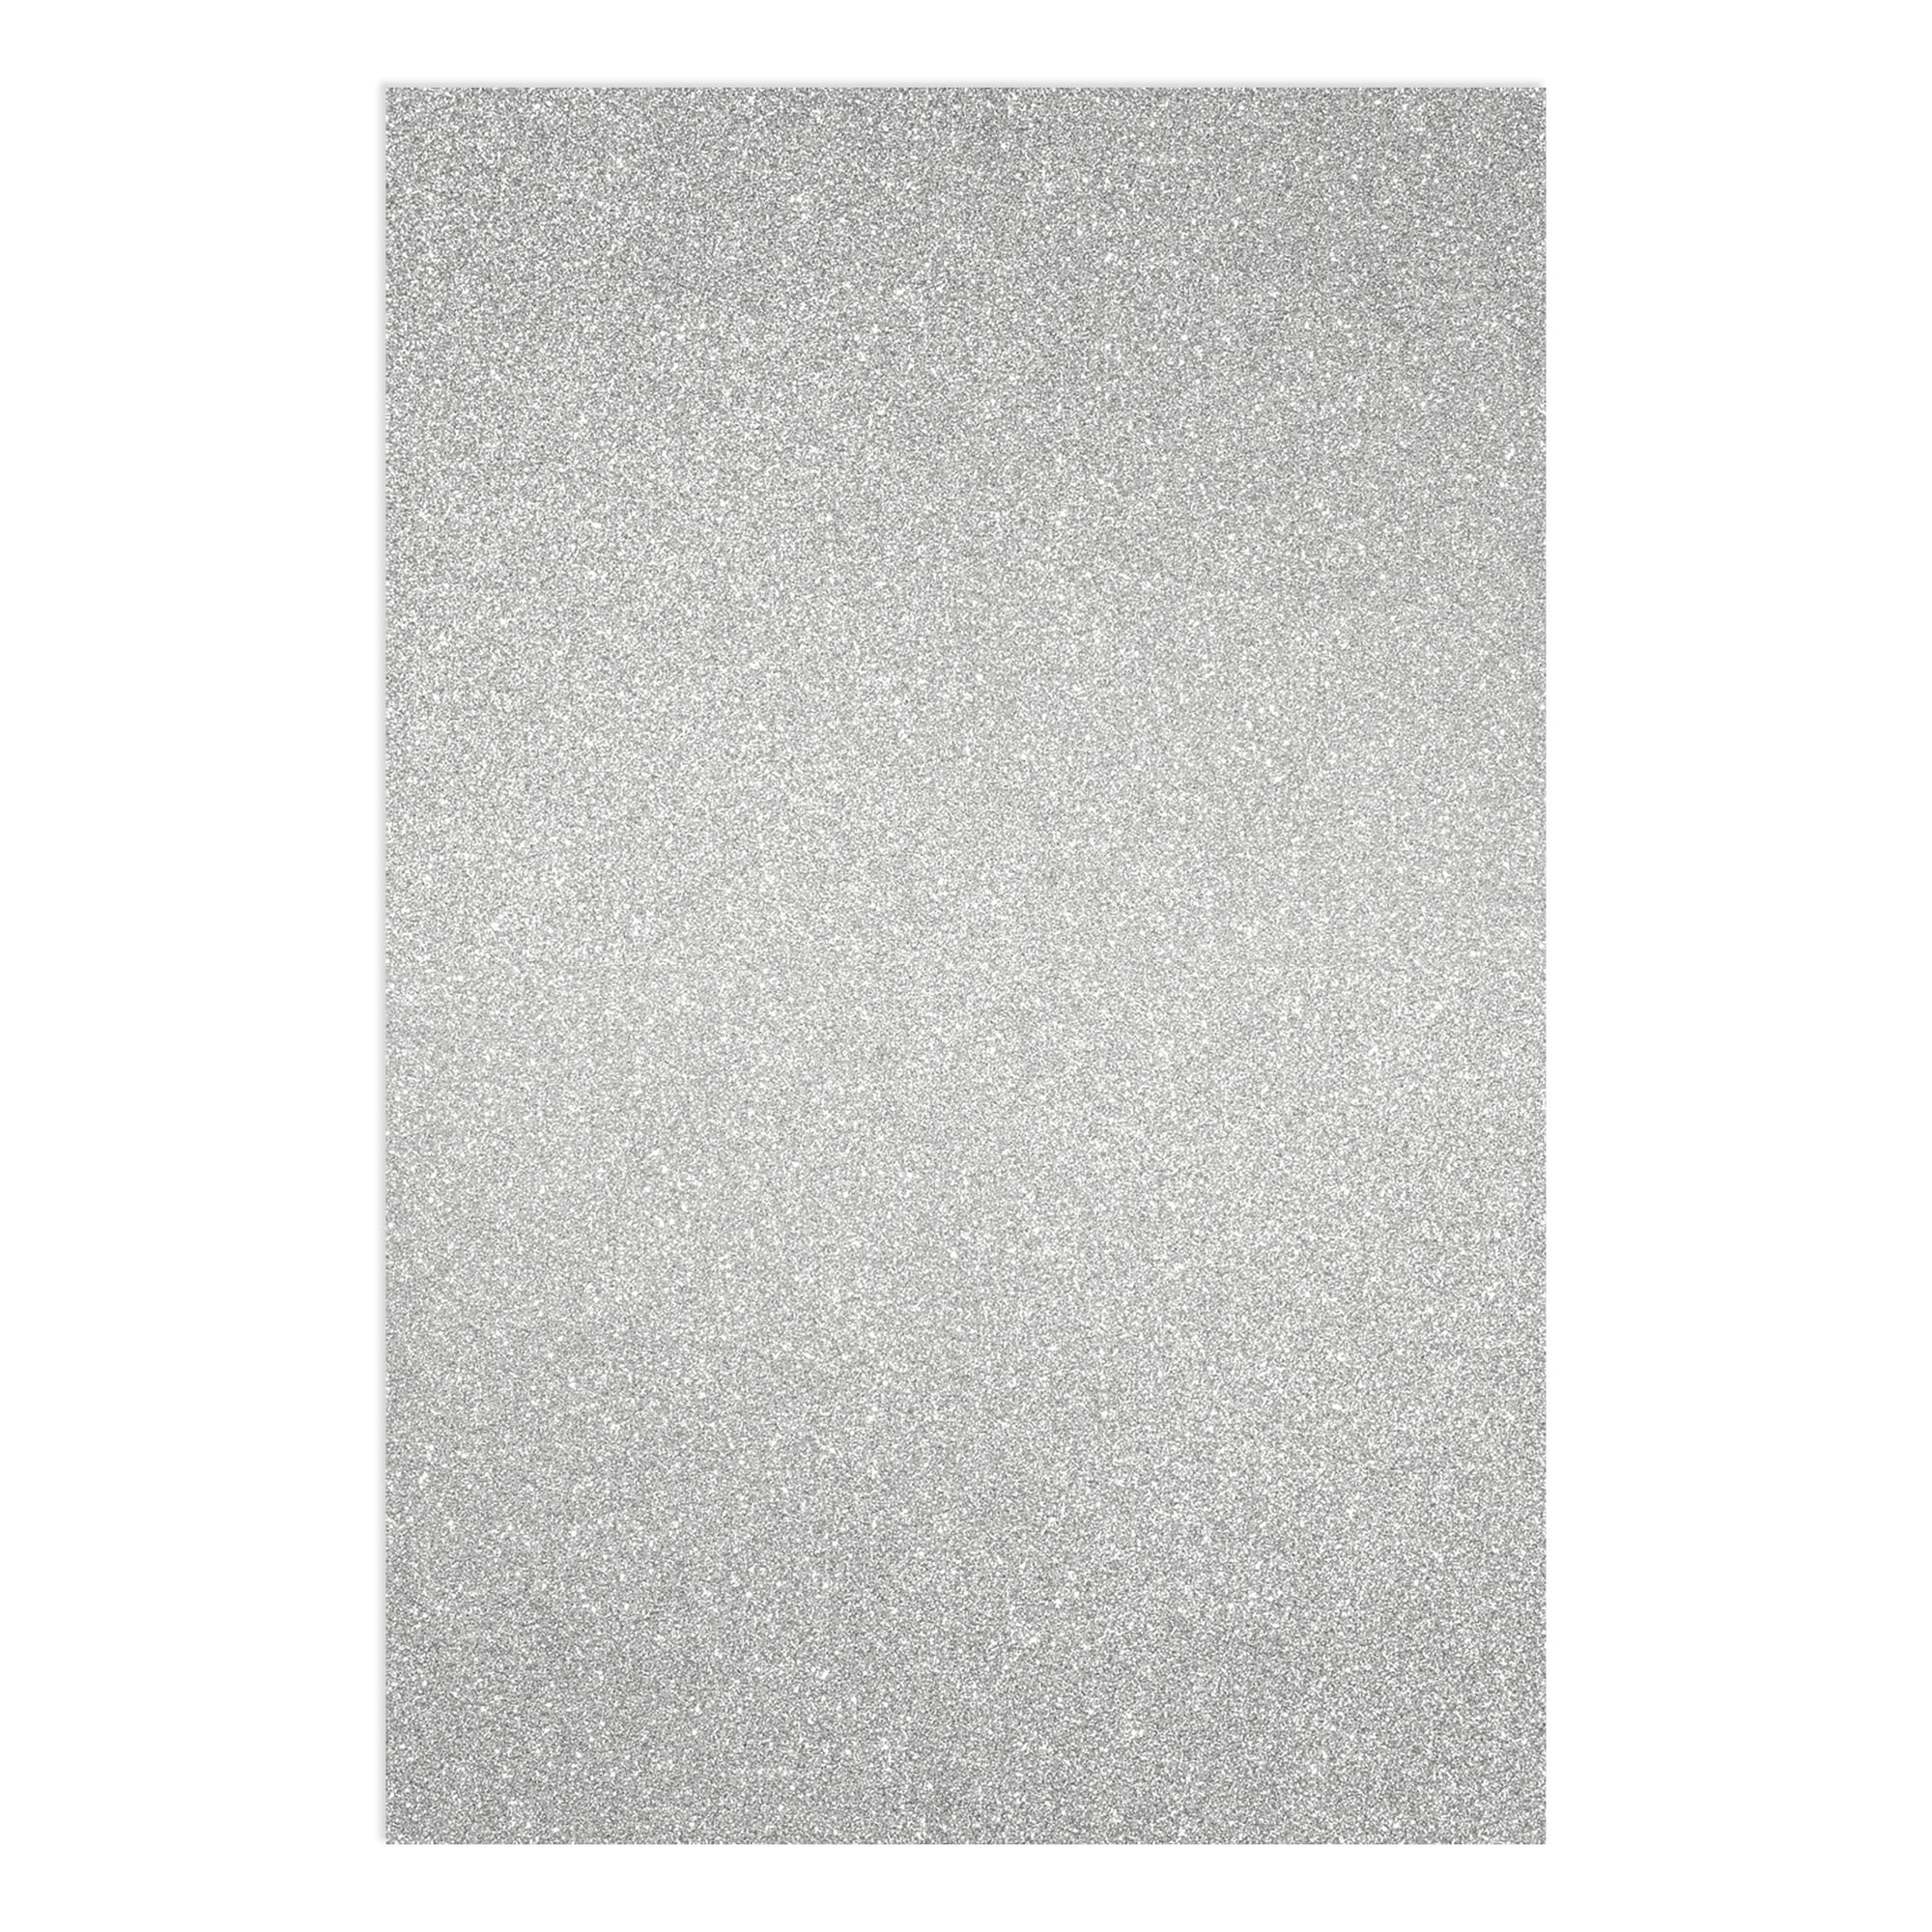 SILVER 12x12 Glitter Cardstock - American Crafts – The 12x12 Cardstock Shop